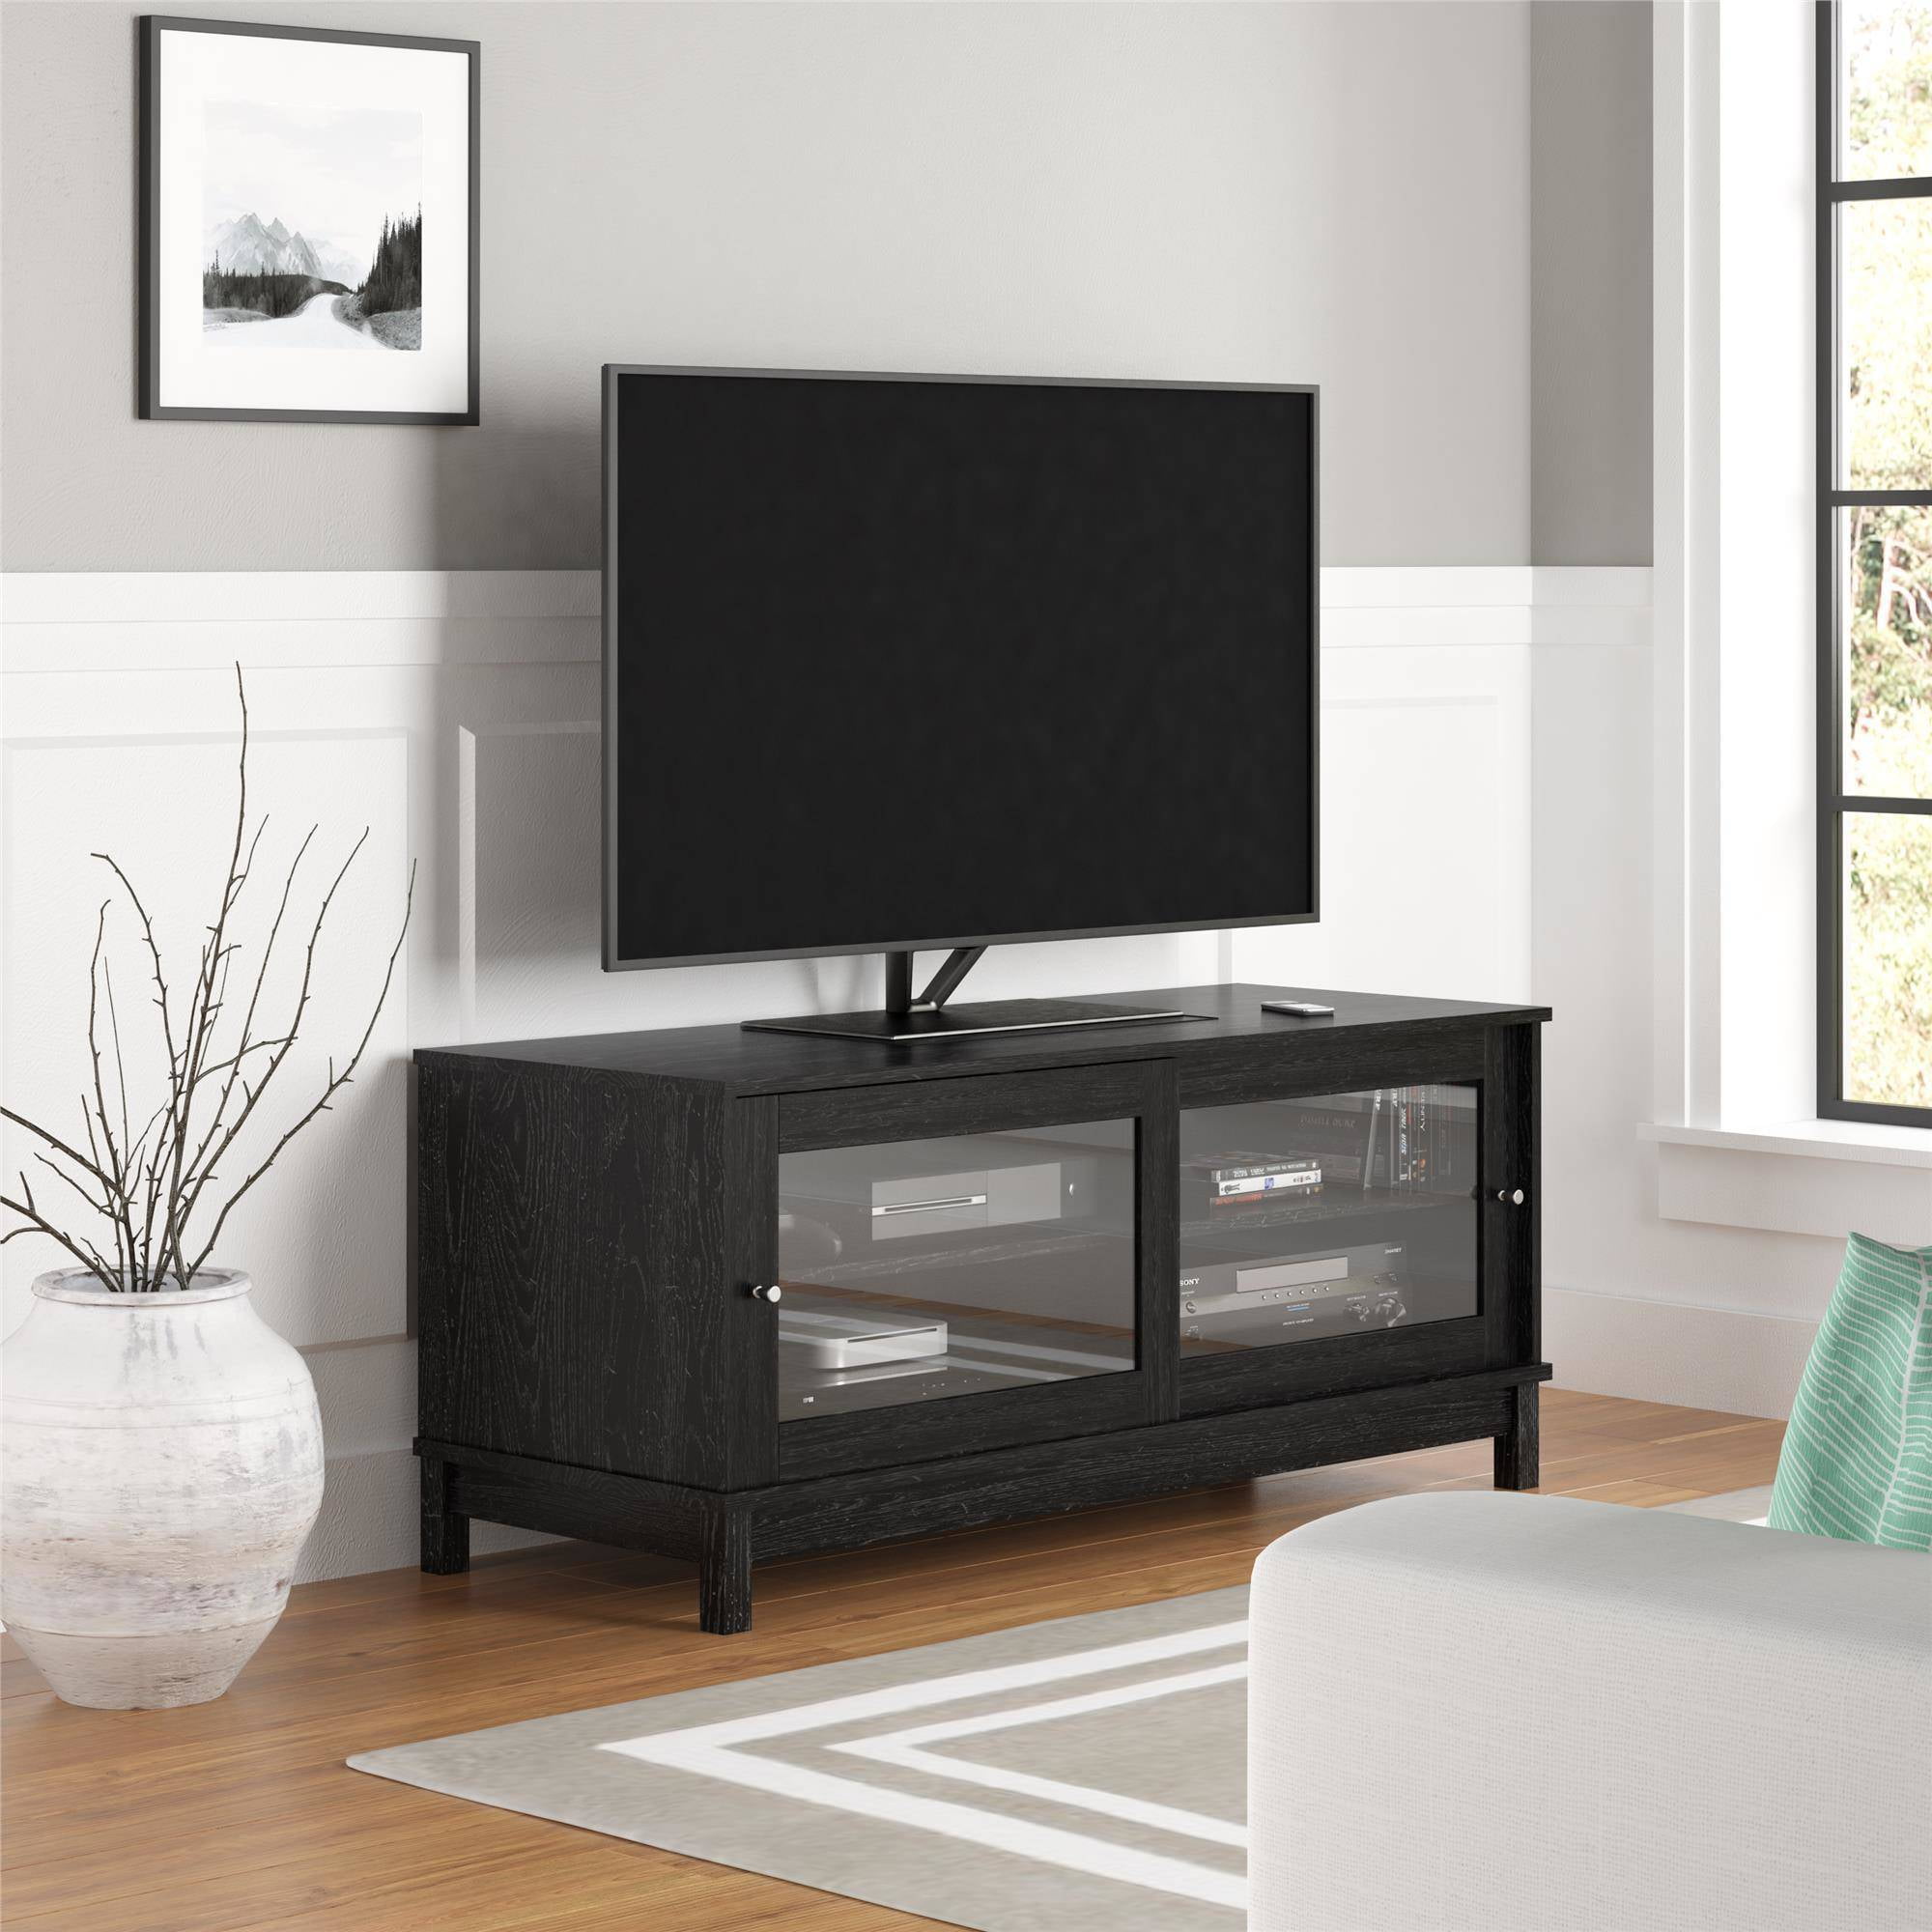 Mainstays TV Stand for TVs up to 55